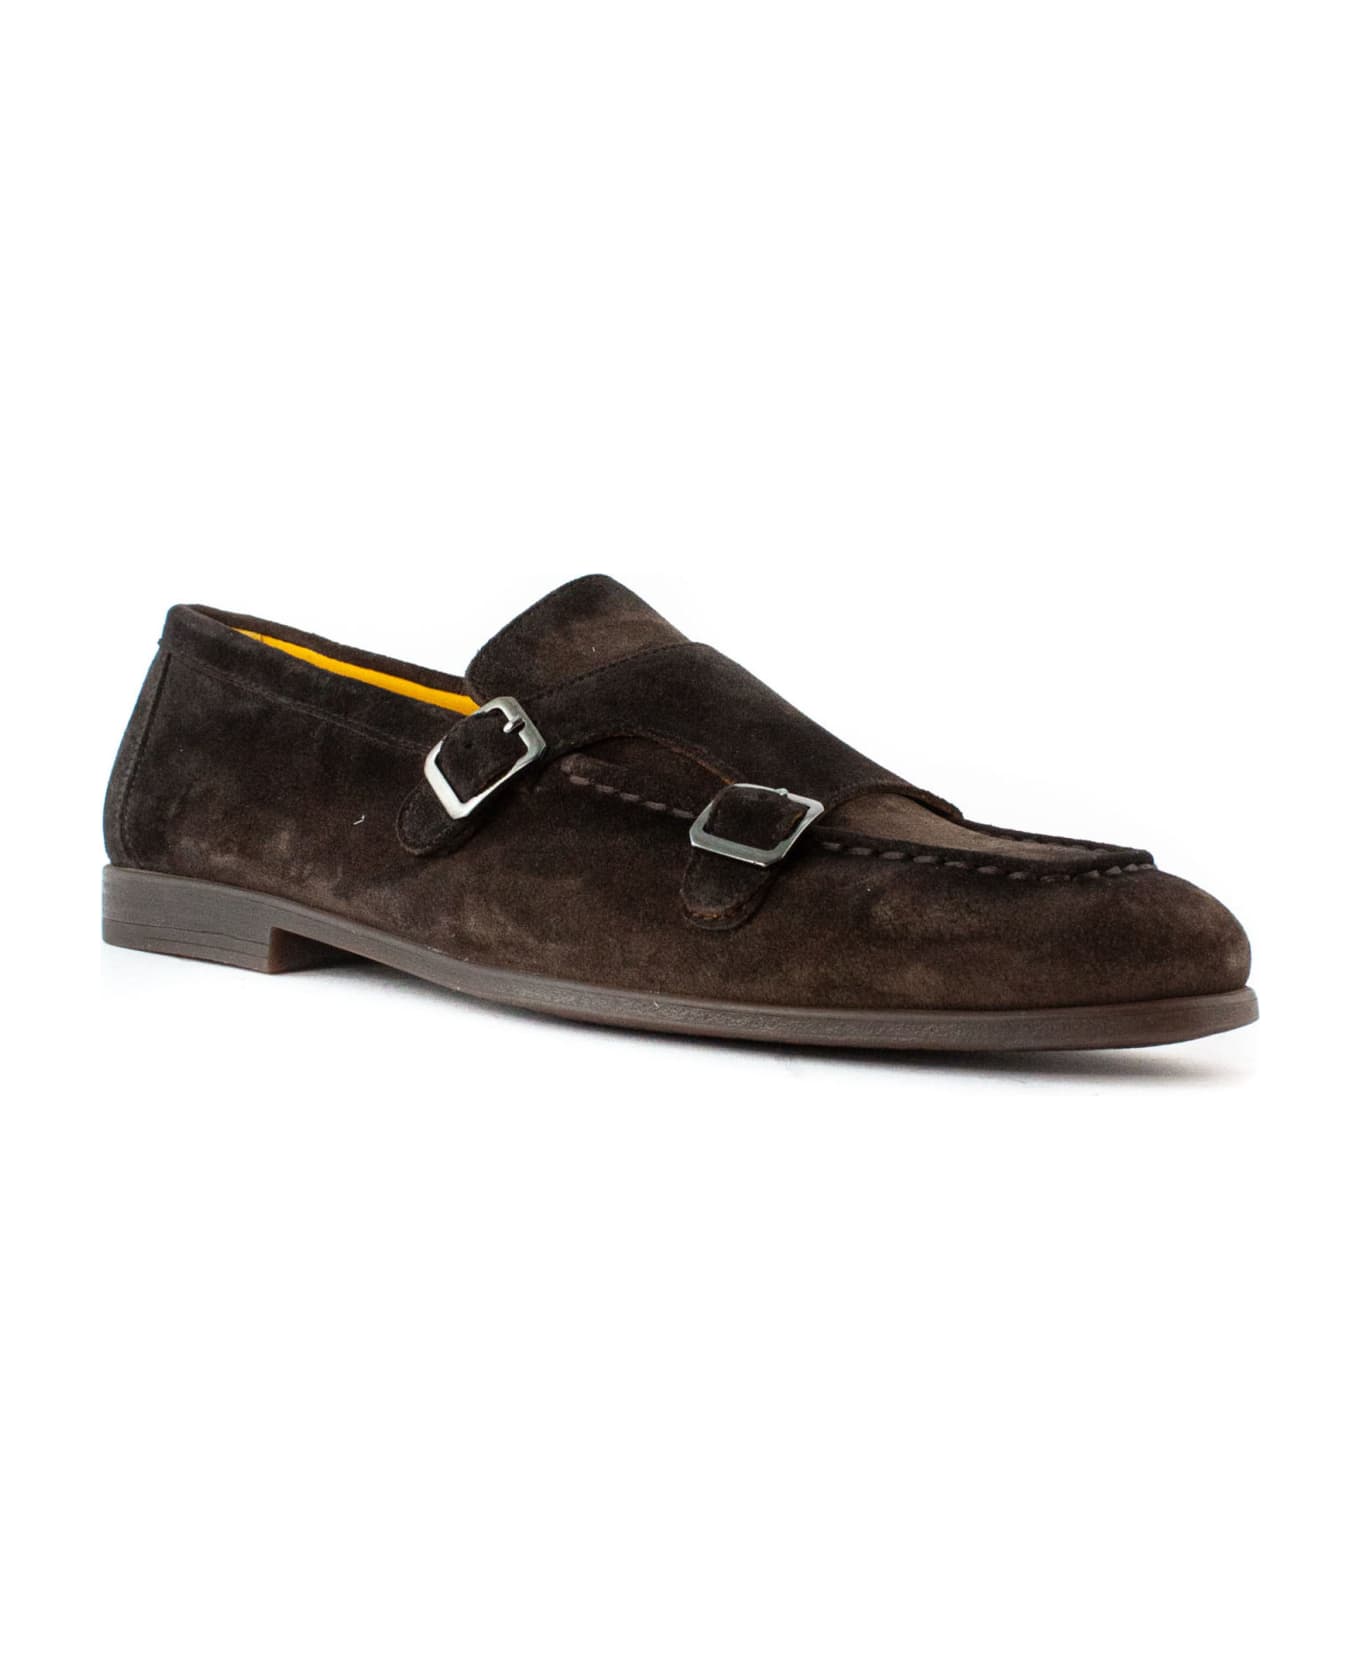 Doucal's Brown Suede Leather Loafer - Brown